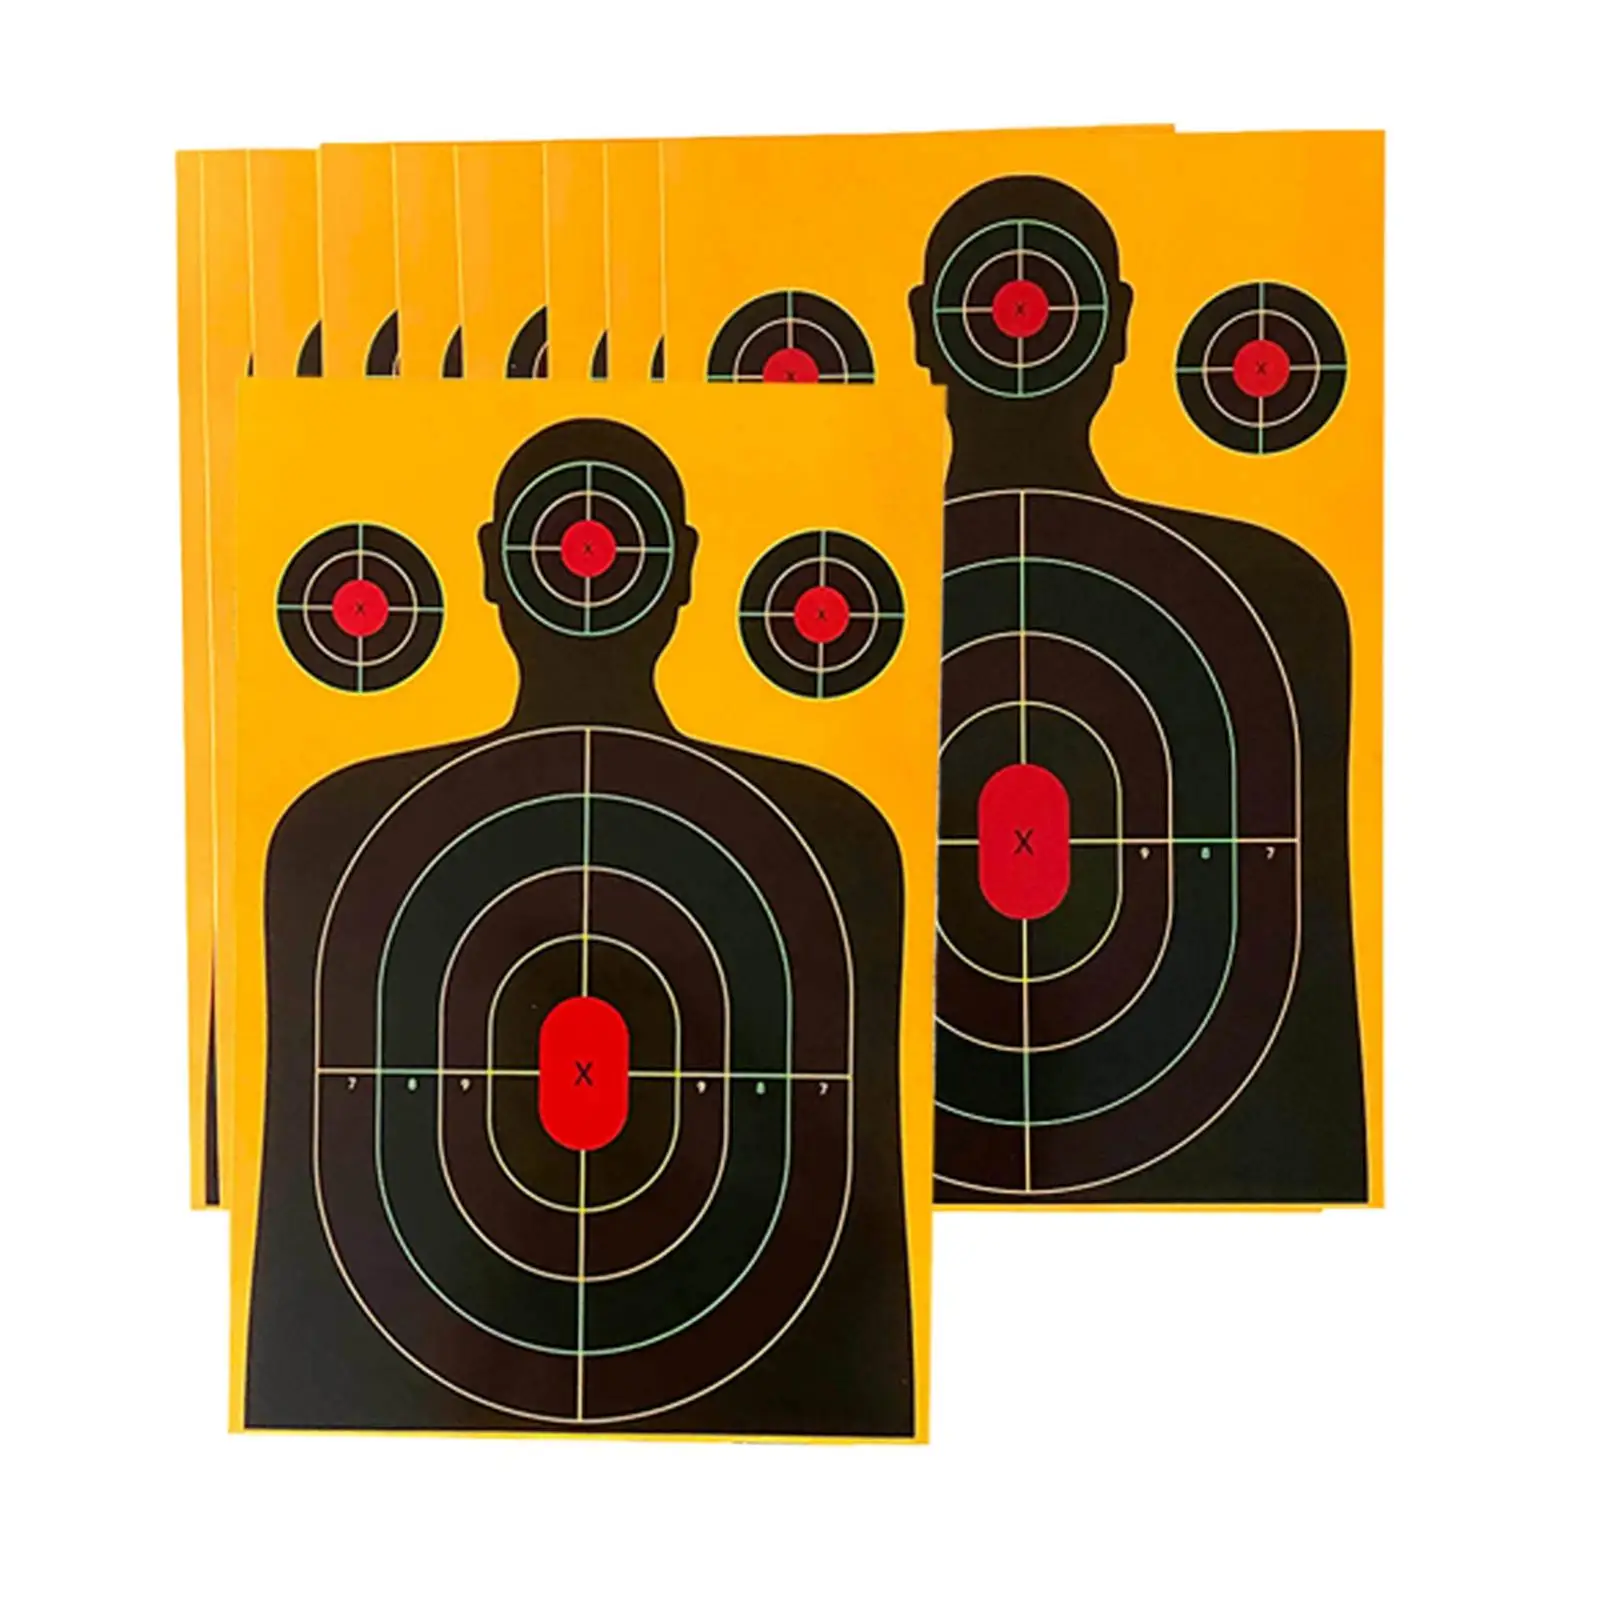 10x Silhouette Target Hunting Practice Highly Visible Durable Sturdy without